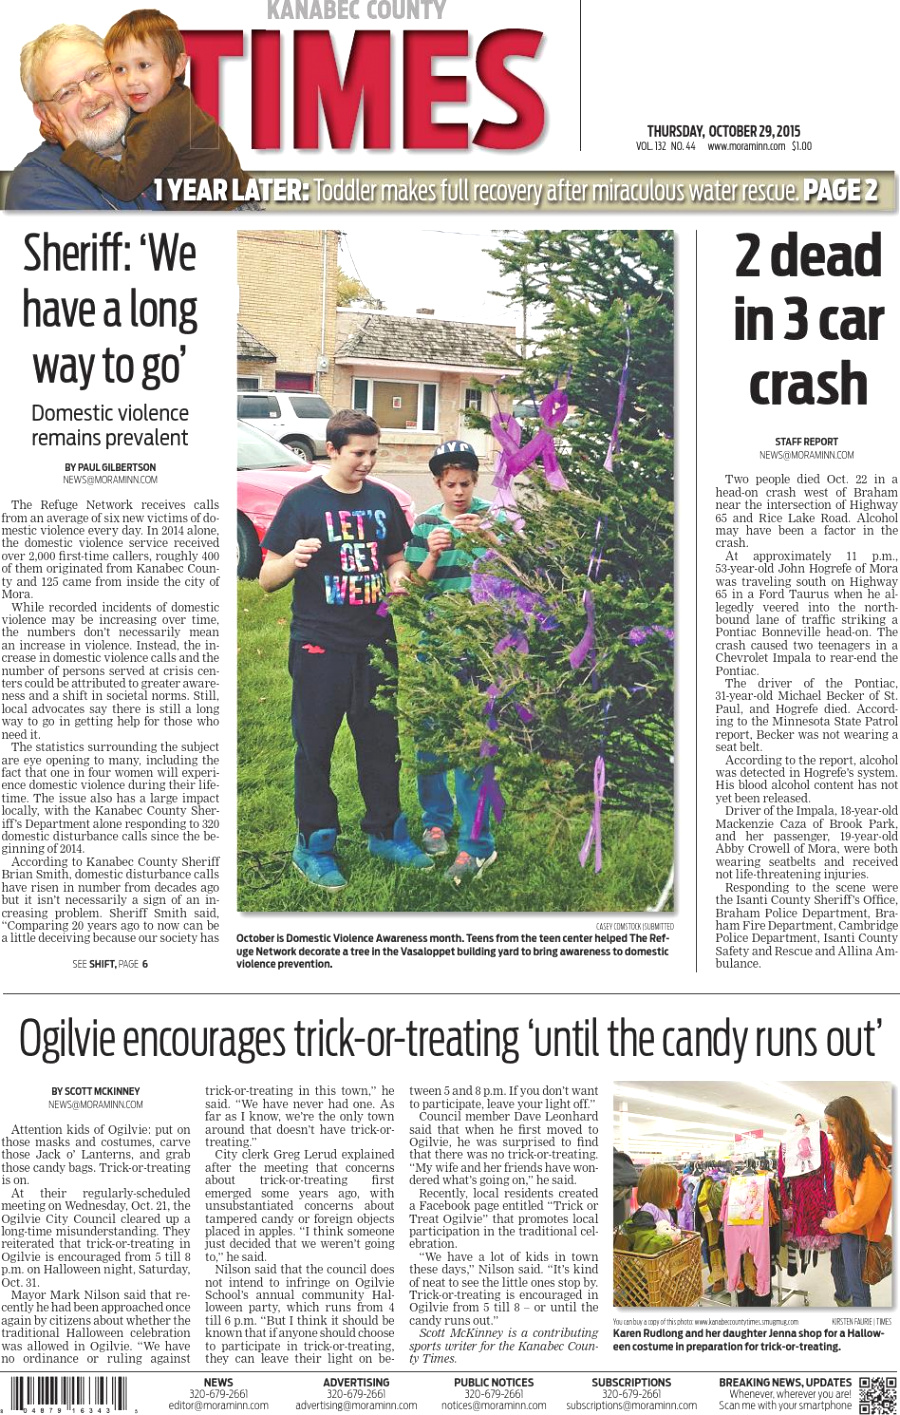 Kanabec Mn Car Accident Lawyer Dans Kanabec County Times: E-edition Oct. 29, 2015 by northstar Media ...